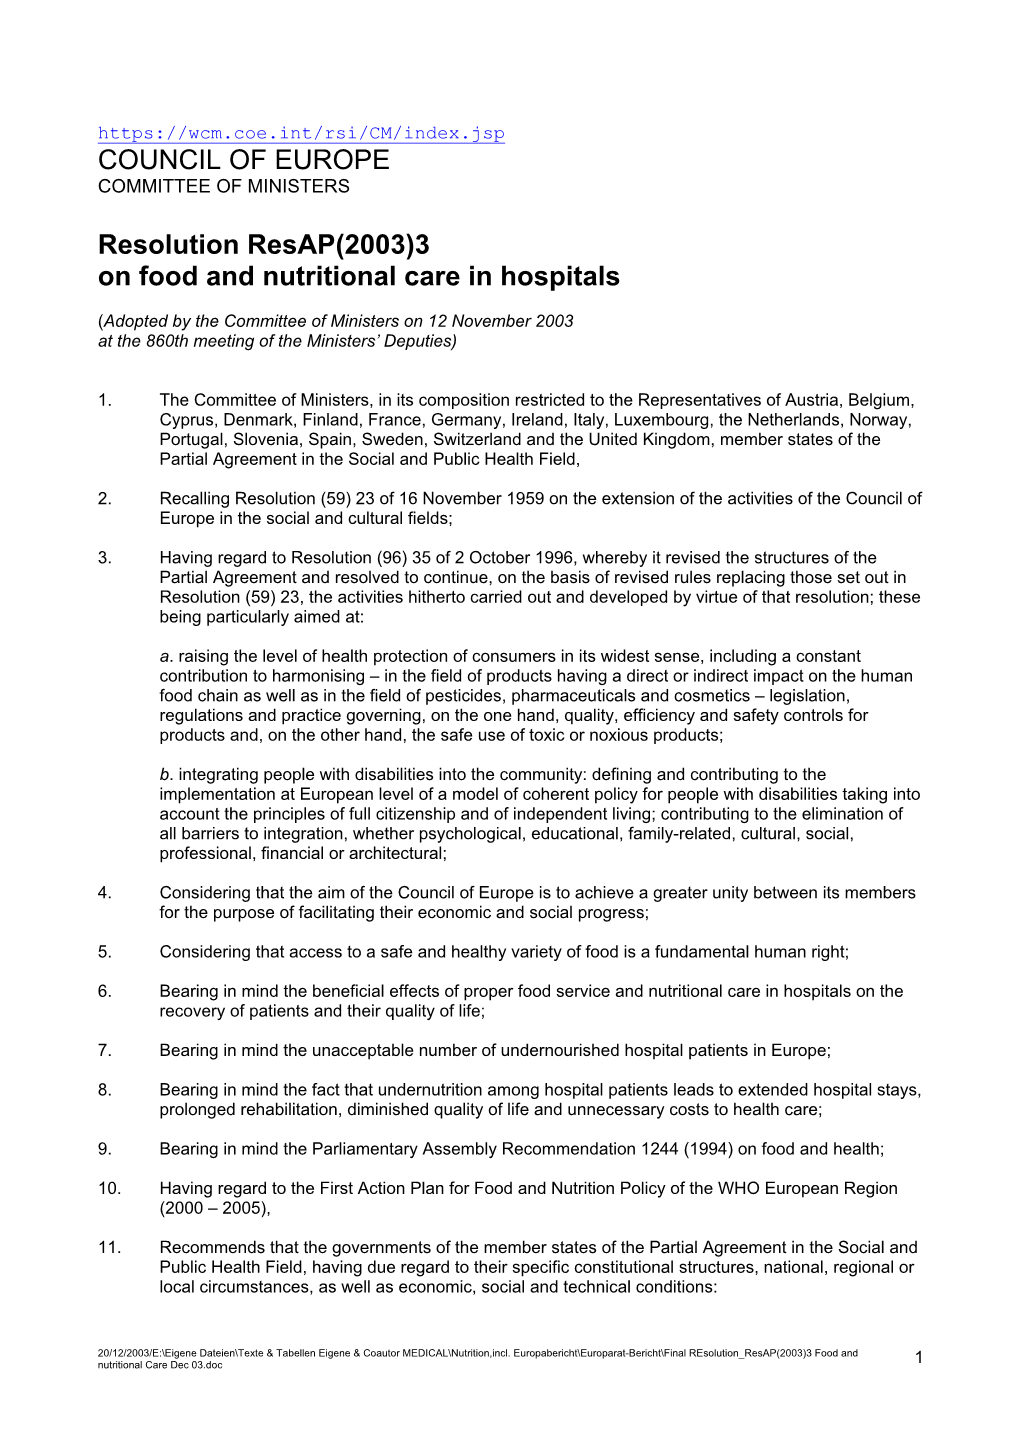 Resolution Resap(2003)3 on Food and Nutritional Care in Hospitals